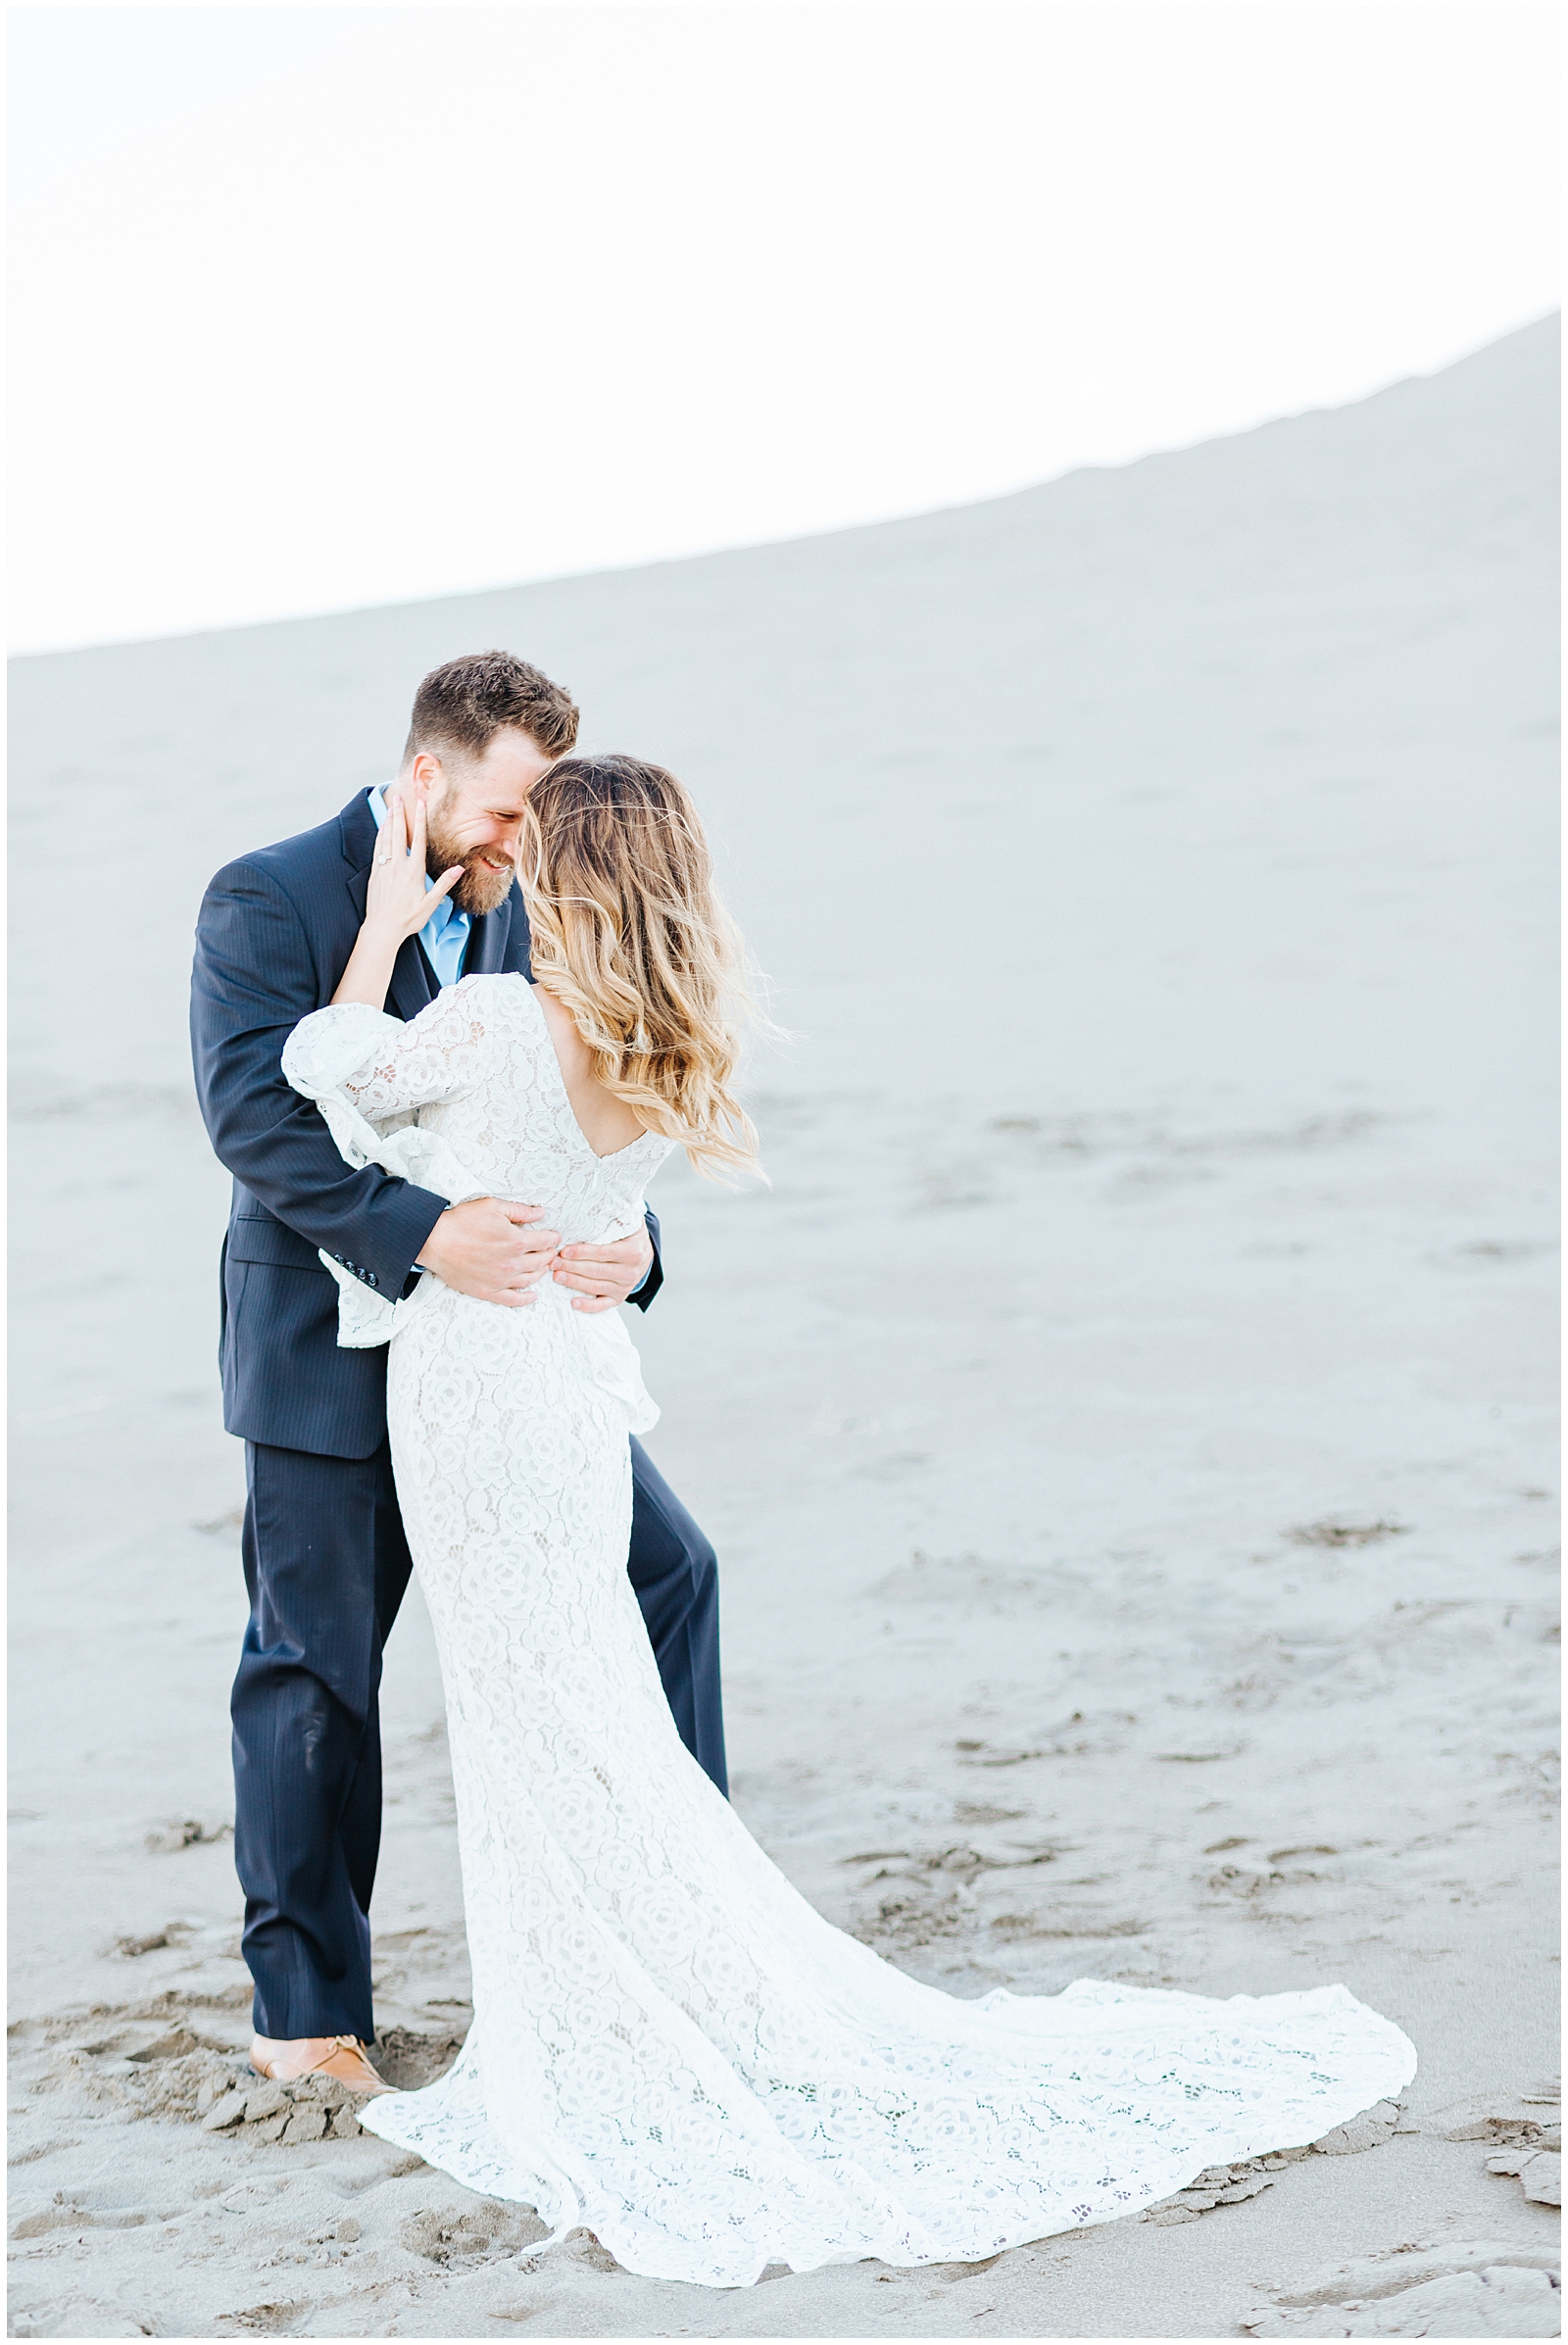 Dreamy Sand Dunes Engagement Photos in White Lacy Lulu's Dress and Navy Suit